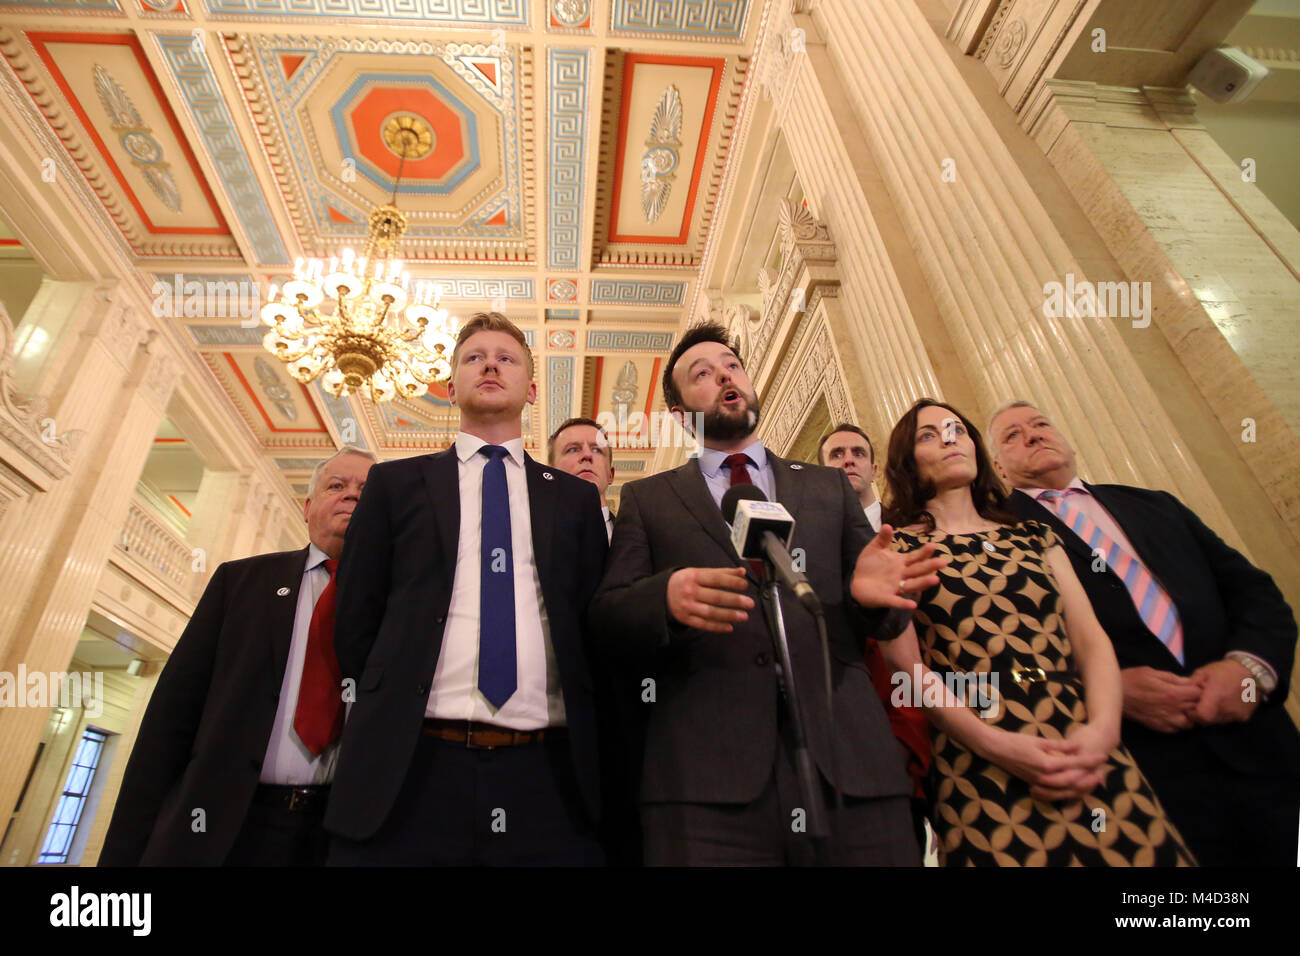 Social Democratic and Labour Party (SDLP) leader Colum Eastwood speaks to the media at Stormont,  Belfast, Monday, Feb 12th, 2018. Britain's Prime Minister Theresa May and Irish Prime Minister Leo Varadkar are to visit Belfast later for talks with the Stormont parties. The Prime Ministers left without a deal to restore devolved government. Stock Photo